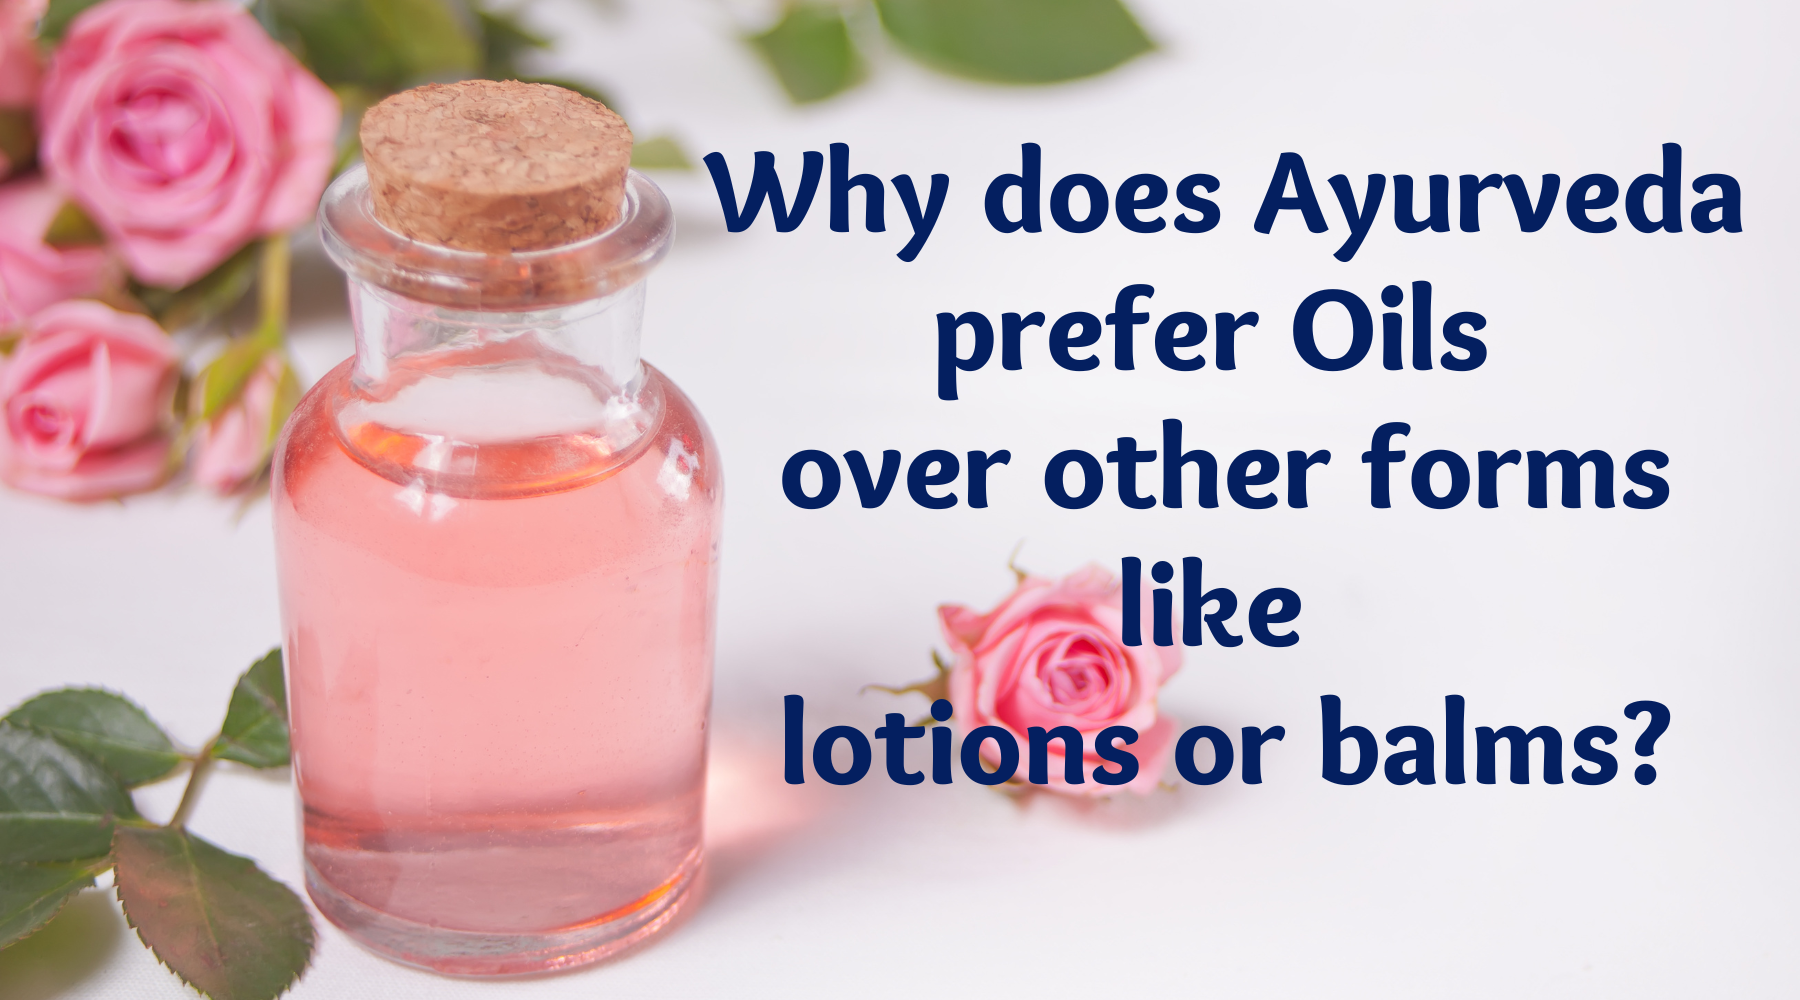 Why does Ayurveda prefer Oils over other forms like lotions or balms?